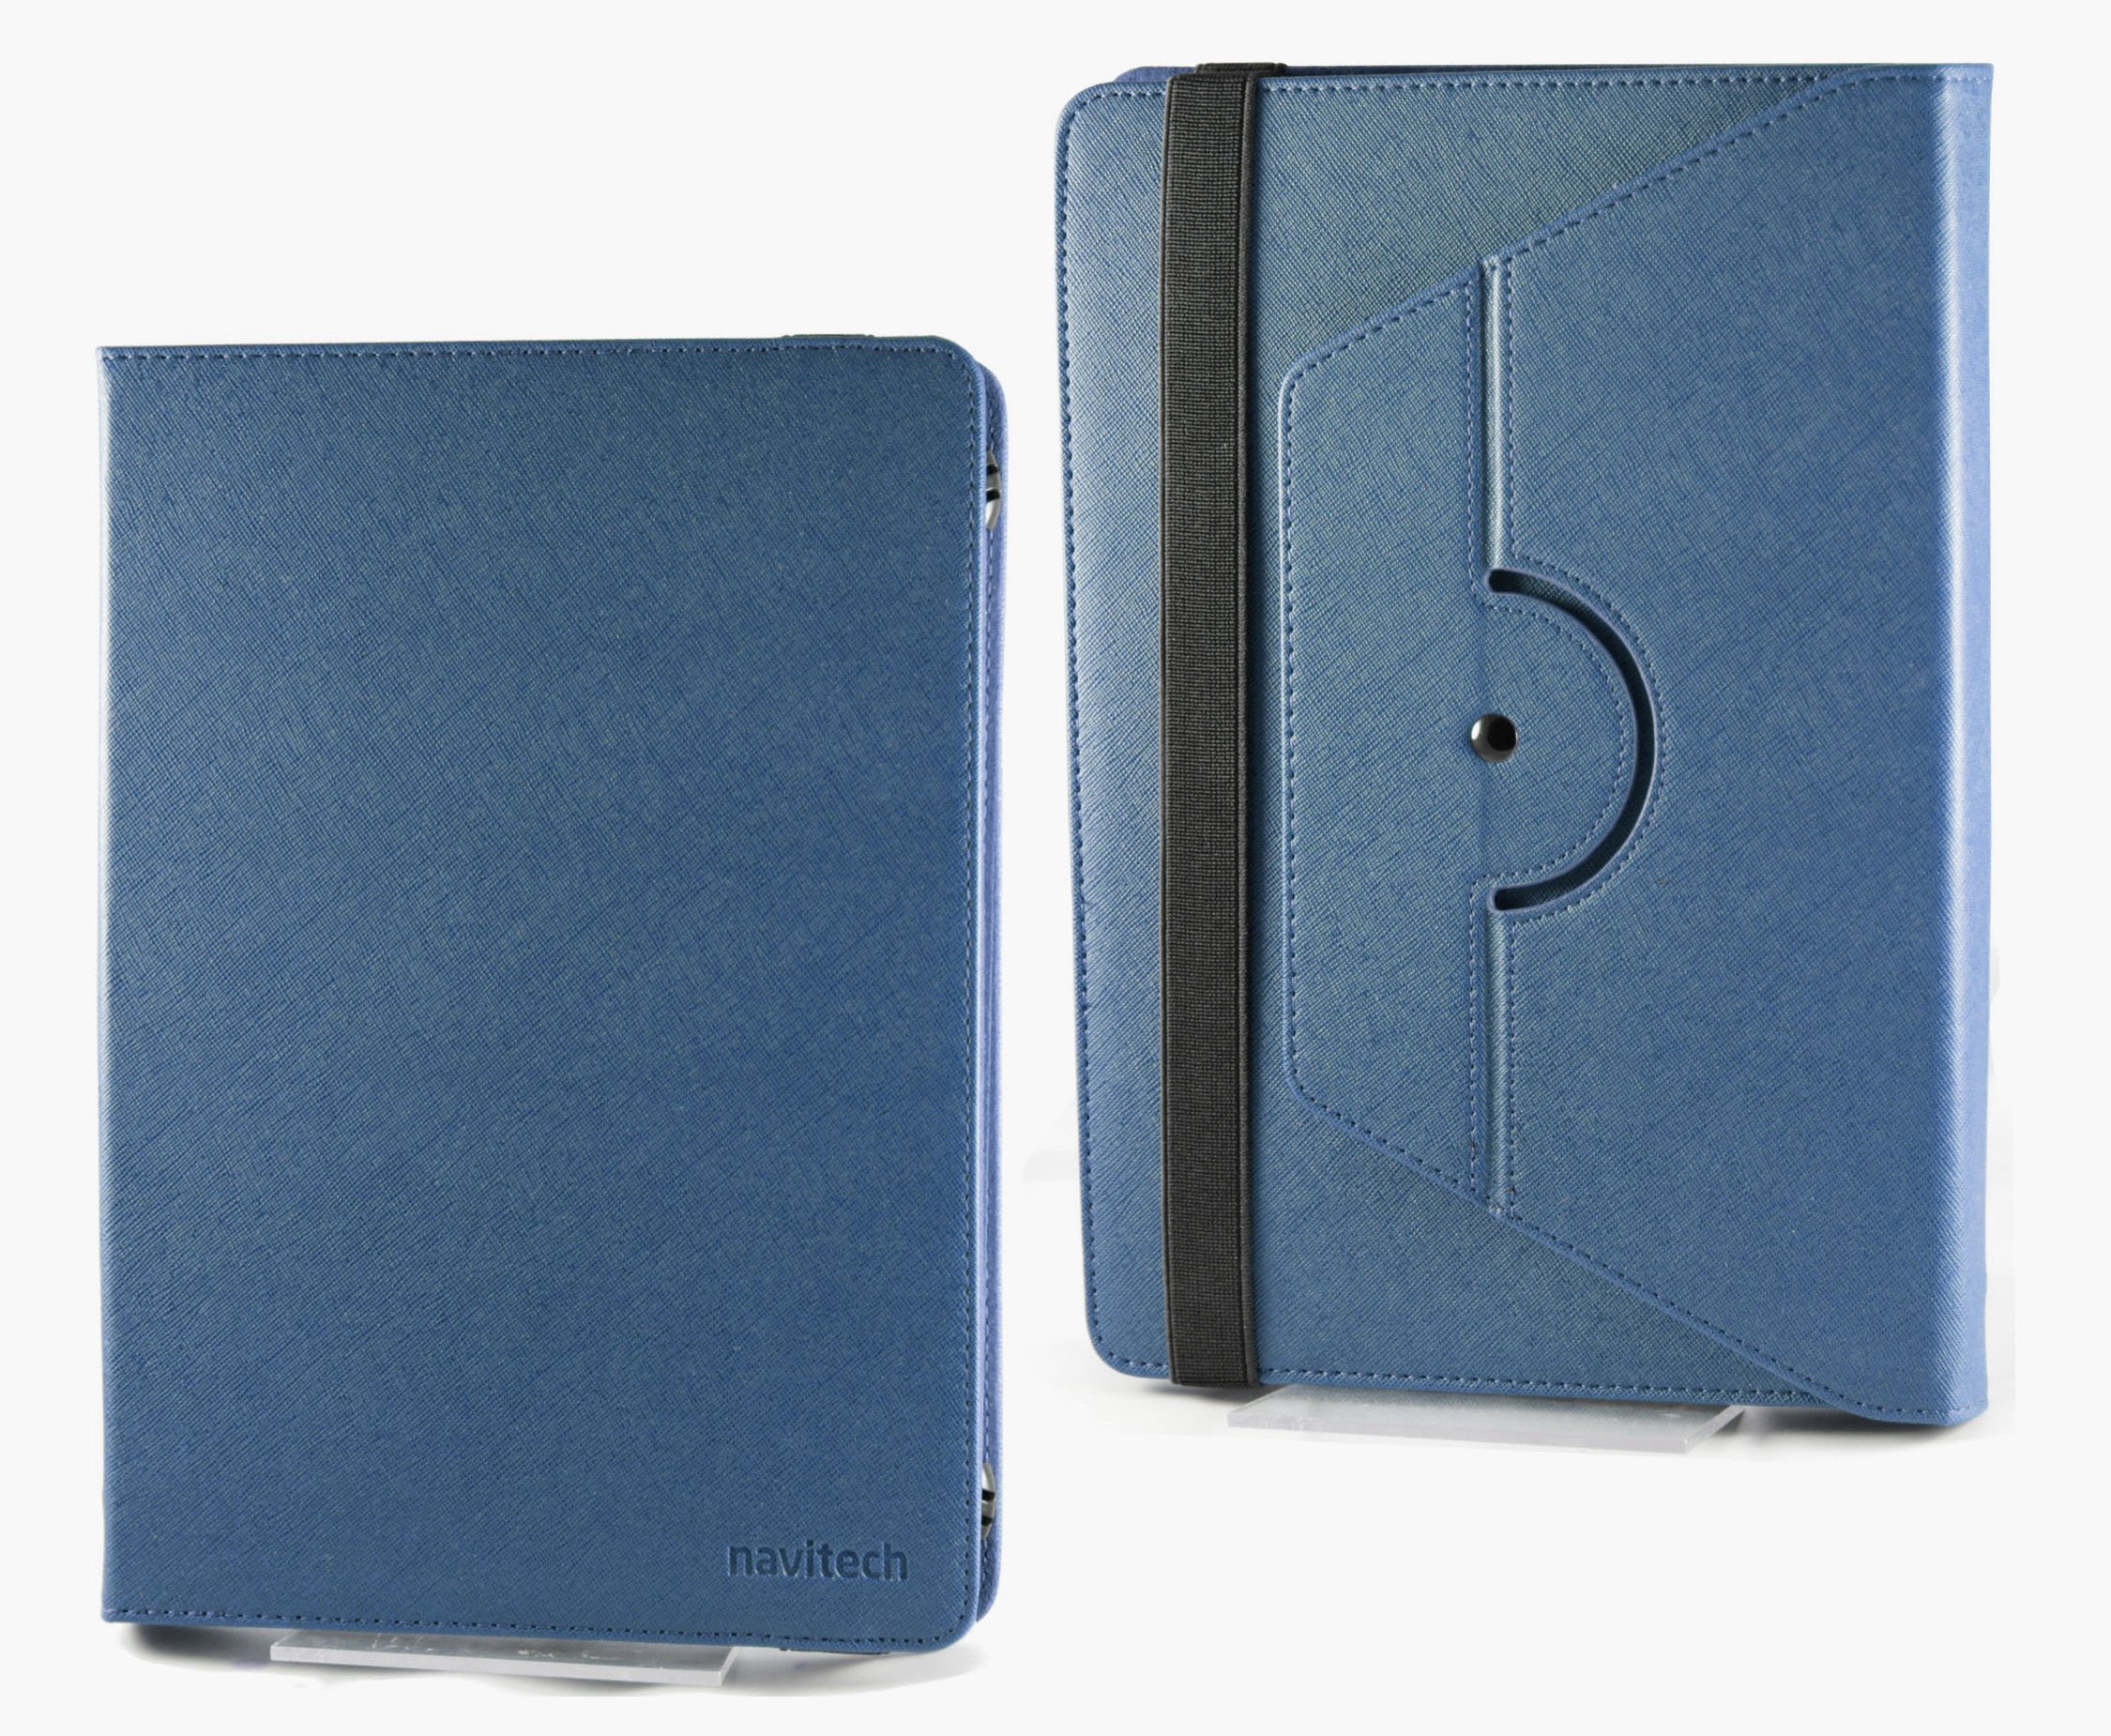 Navitech 7" Blue Leather Book Style Folio Case/Cover & Stylus Pen Compatible with The HP 7 Plus 1301 / HP Slate 7 HD/HP Slate 7 / HP Slate 7 Plus HD/HP Slate 7 VoiceTab